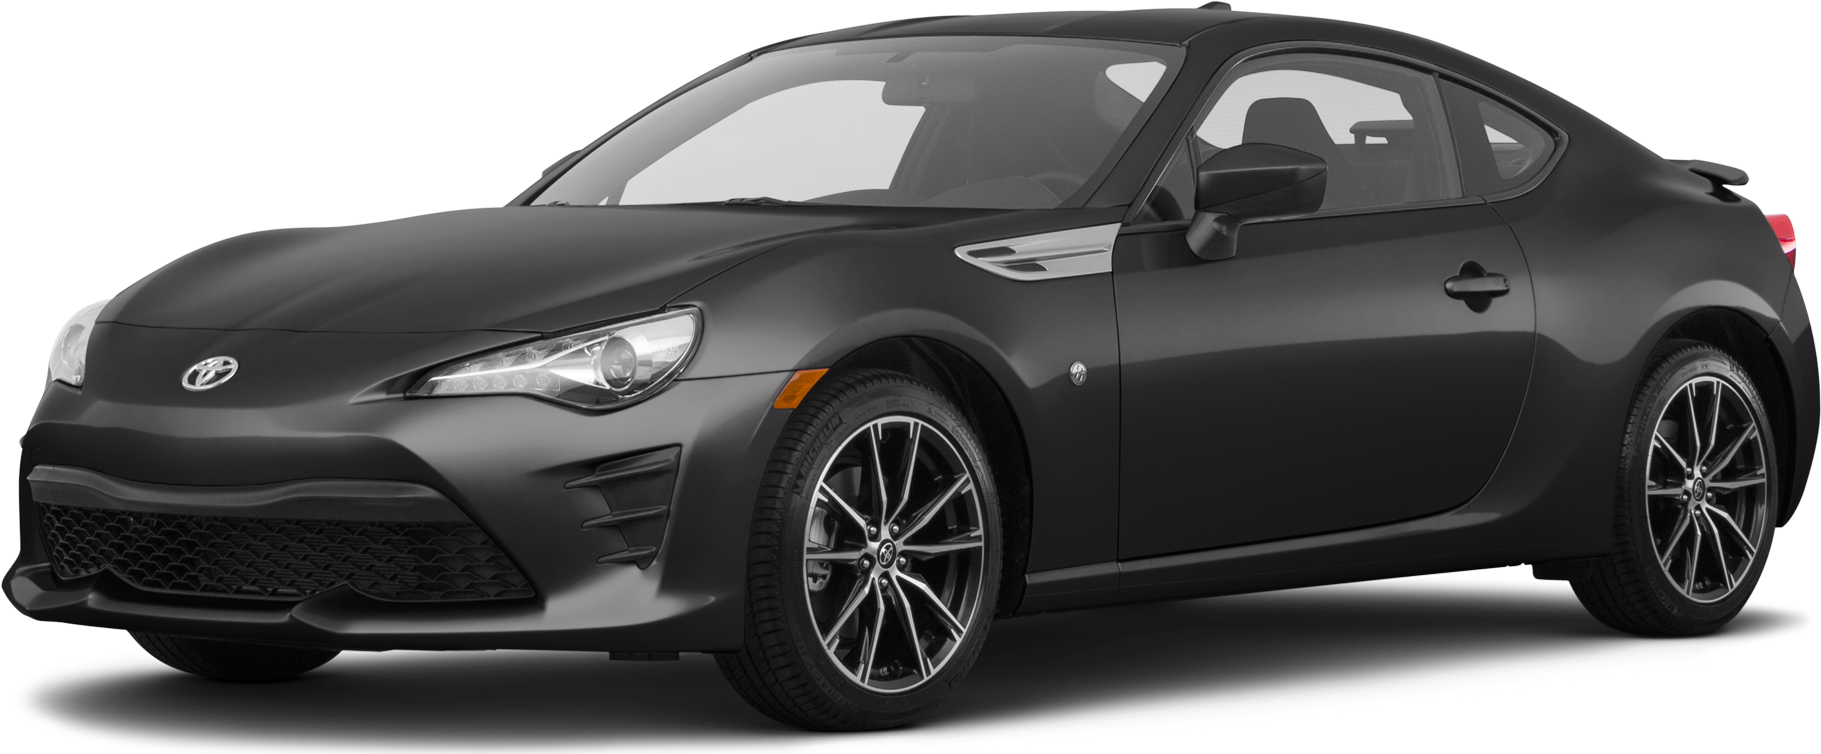 2017 Toyota 86 Values & Cars for Sale Kelley Blue Book